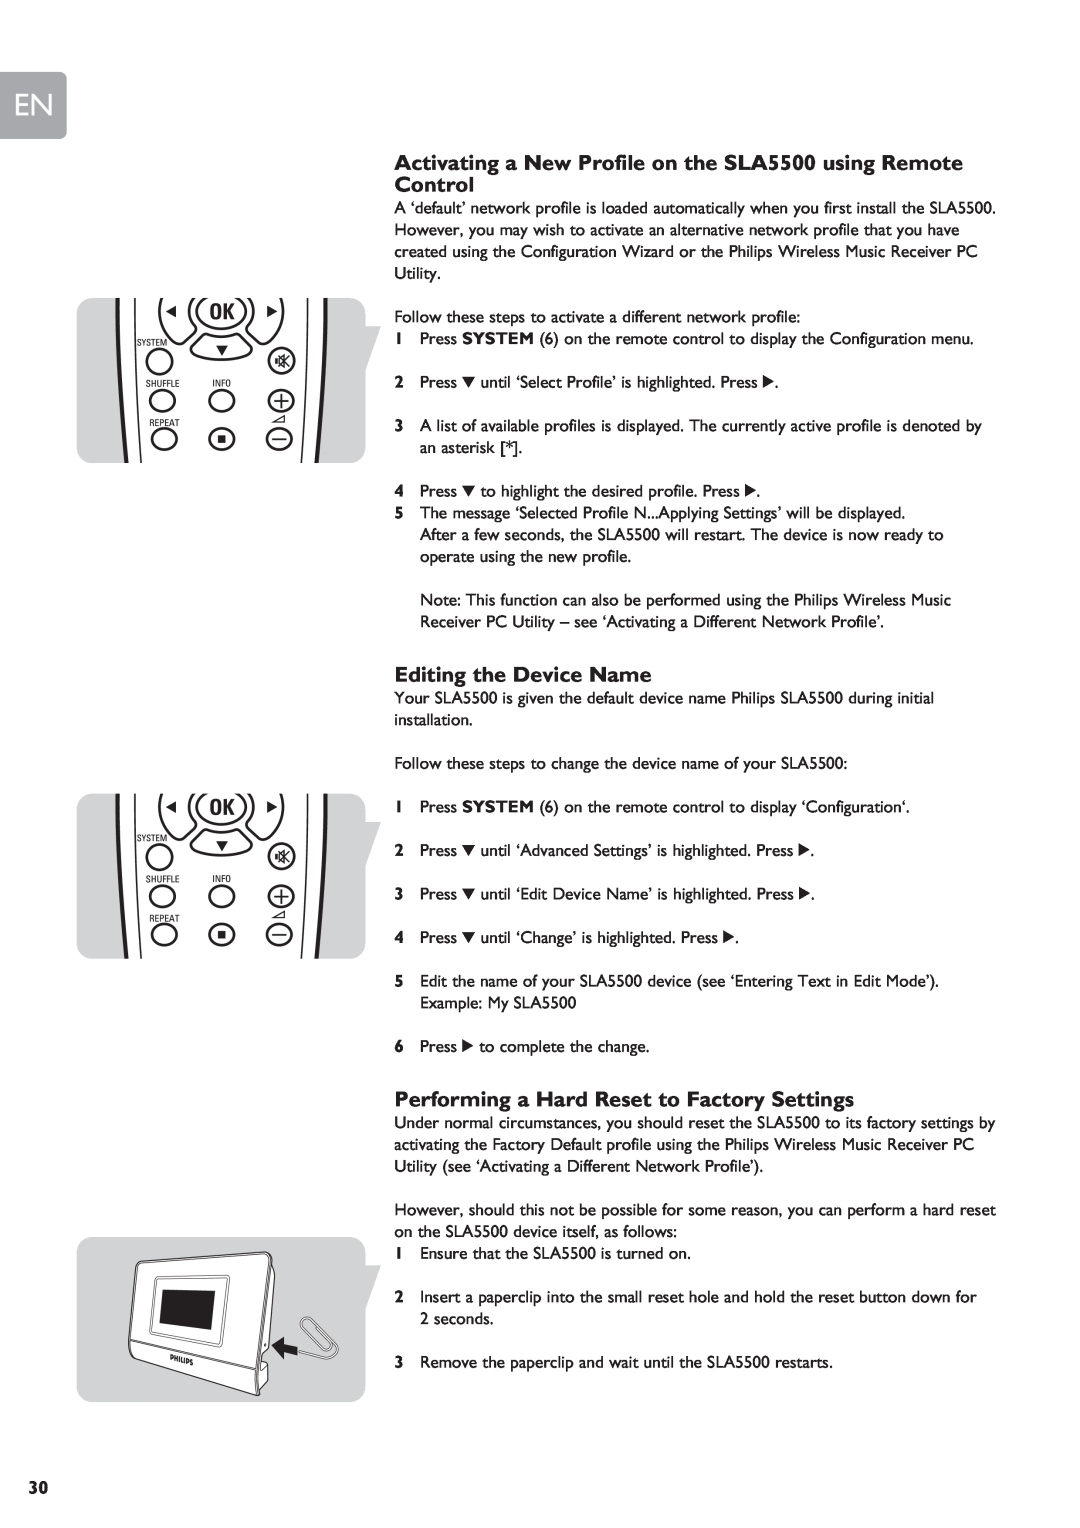 Philips SLA5500 user manual Control, Editing the Device Name, Performing a Hard Reset to Factory Settings 